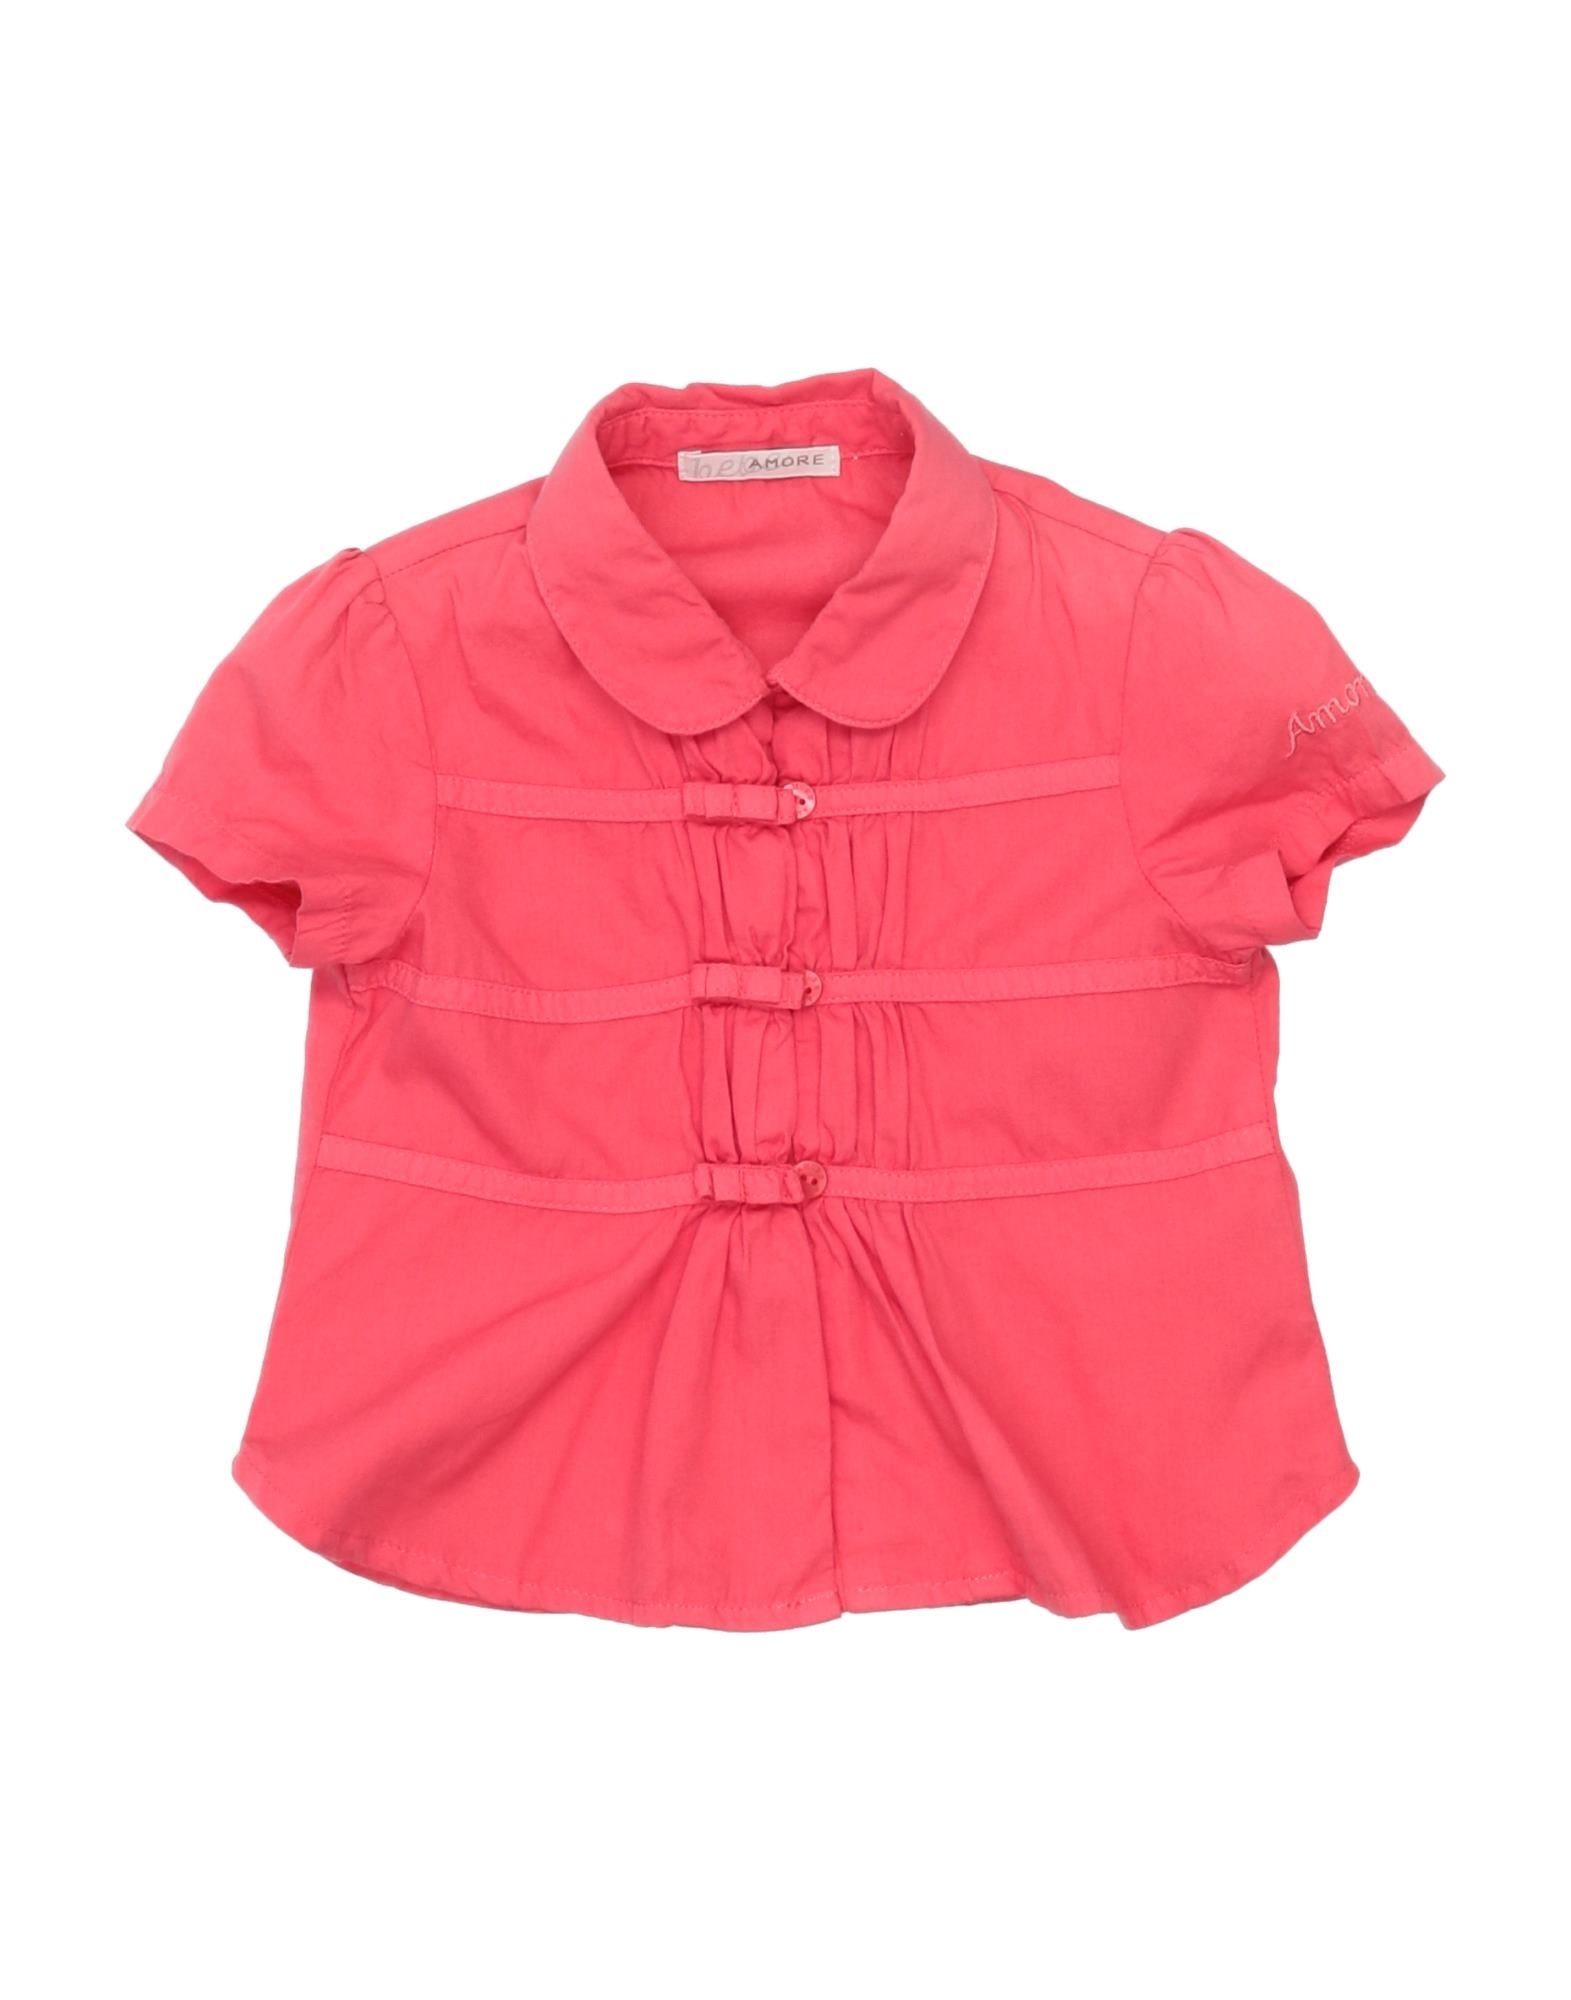 Amore Babies' Shirts In Coral